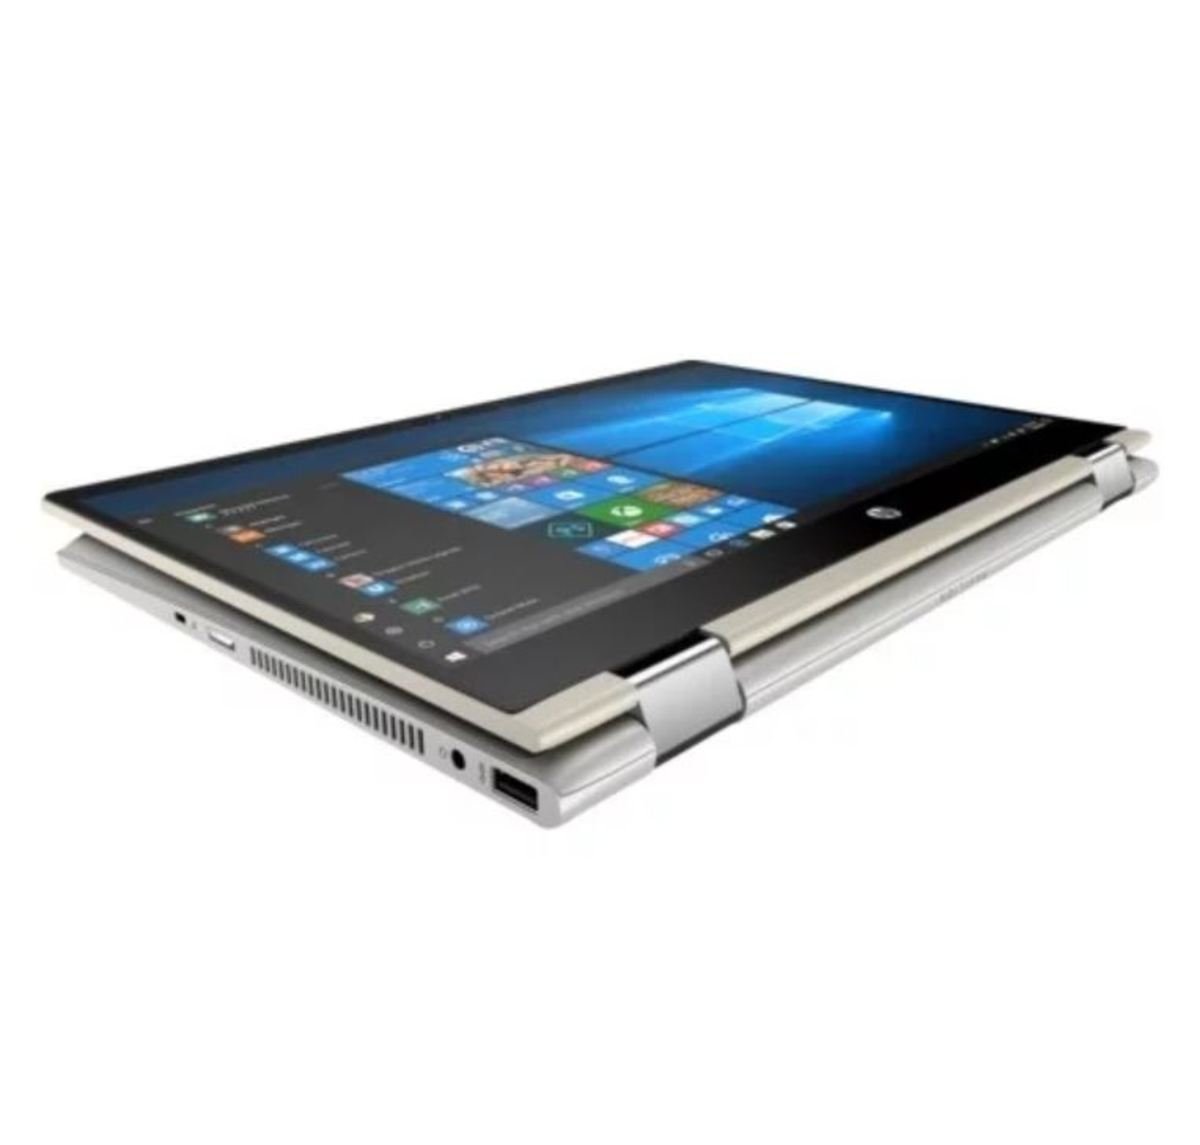 HP Pavilion Notebook X360-14CD1004 Core i5 Gold